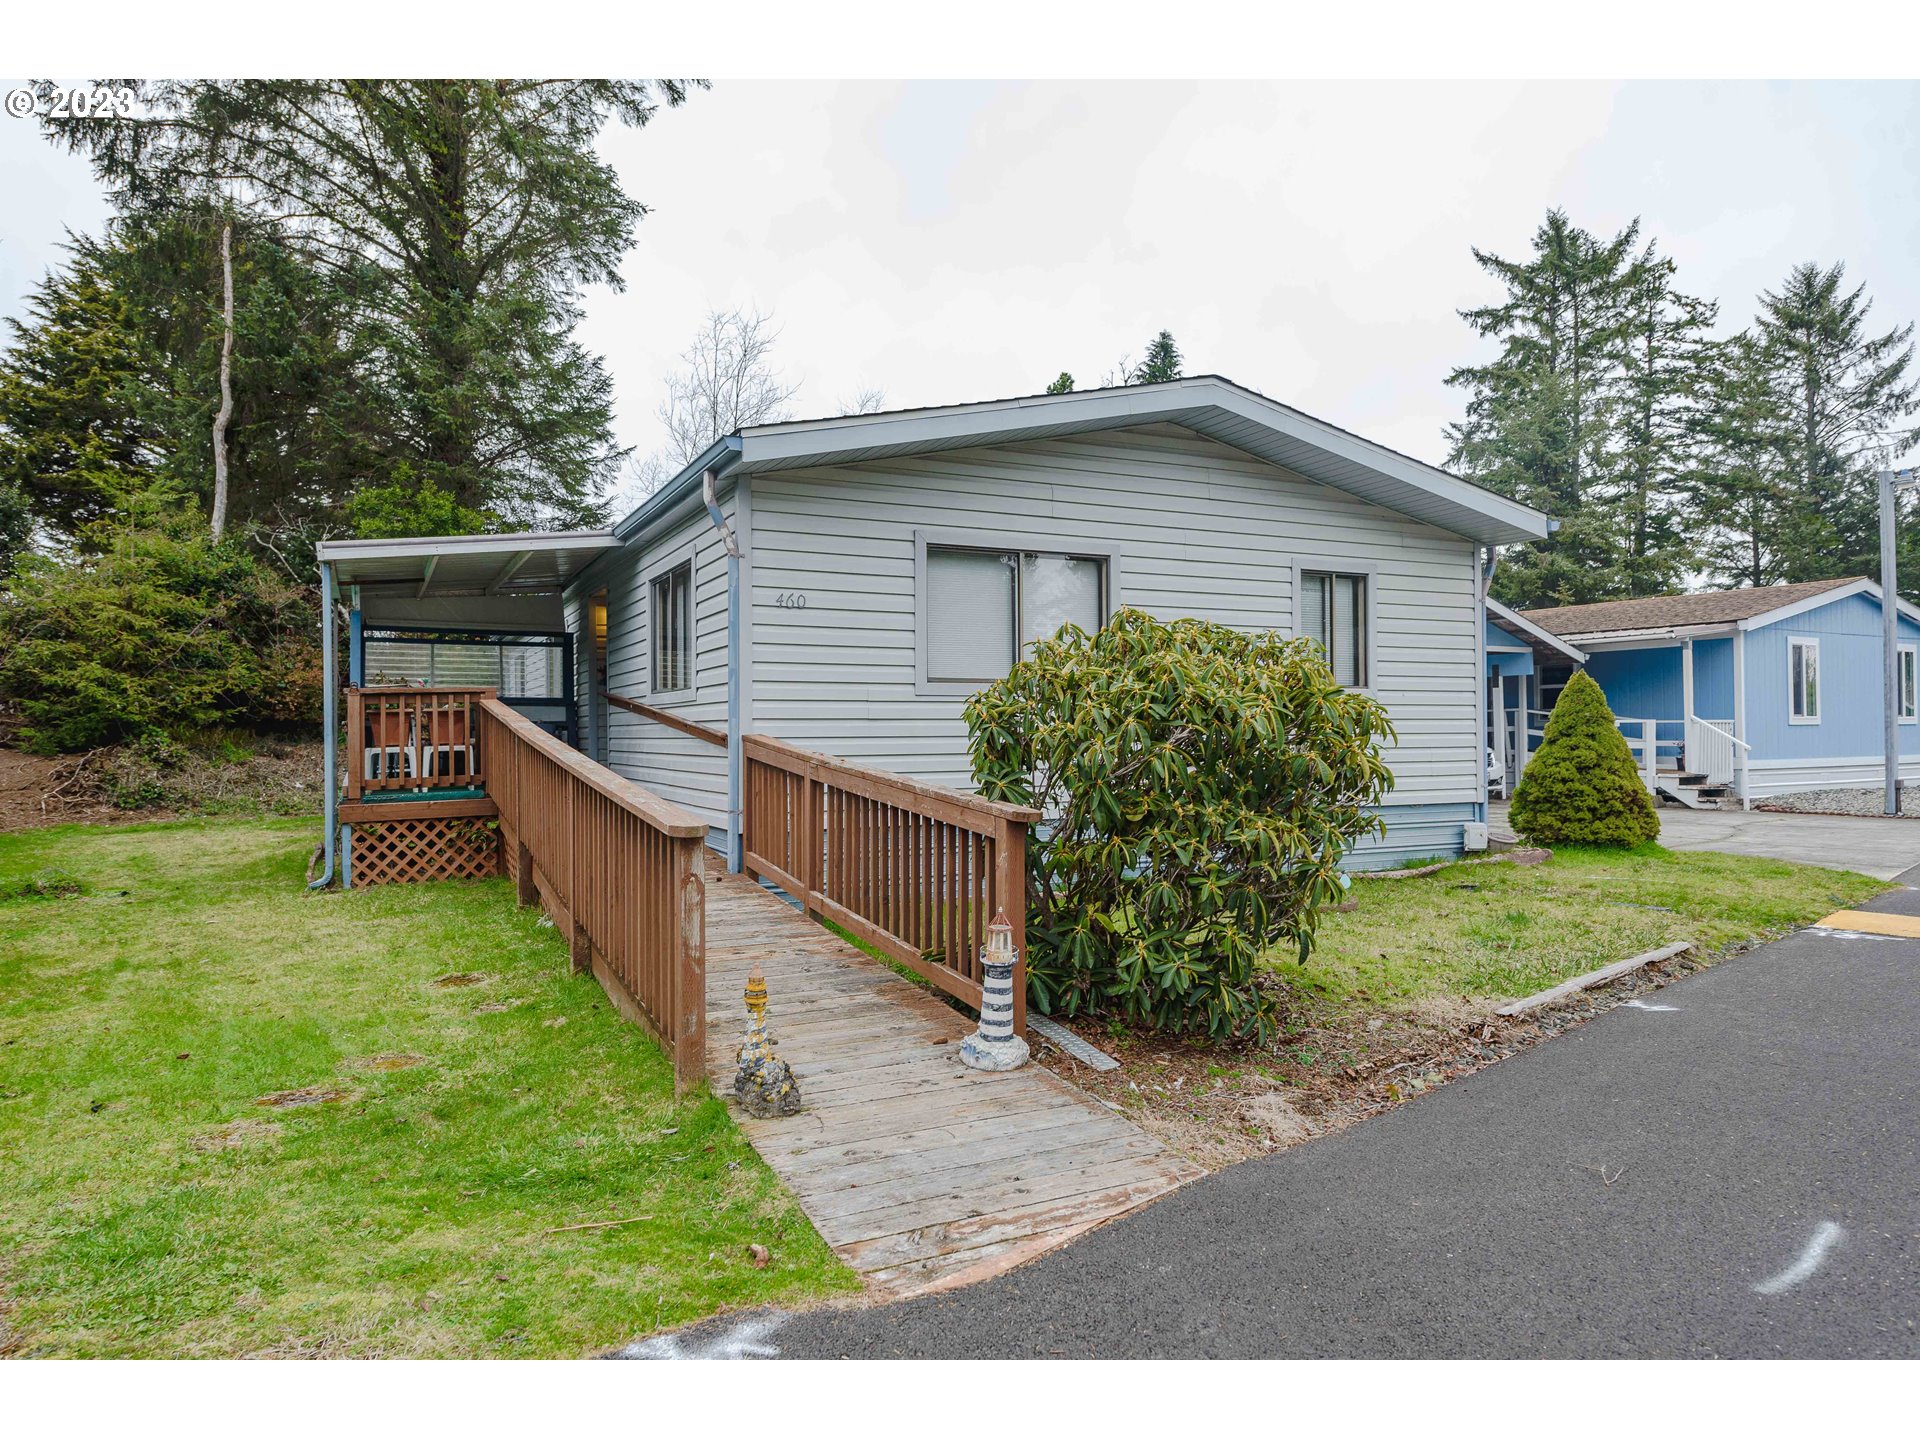 460 SHOREPINES AVE, Coos Bay, OR 97420